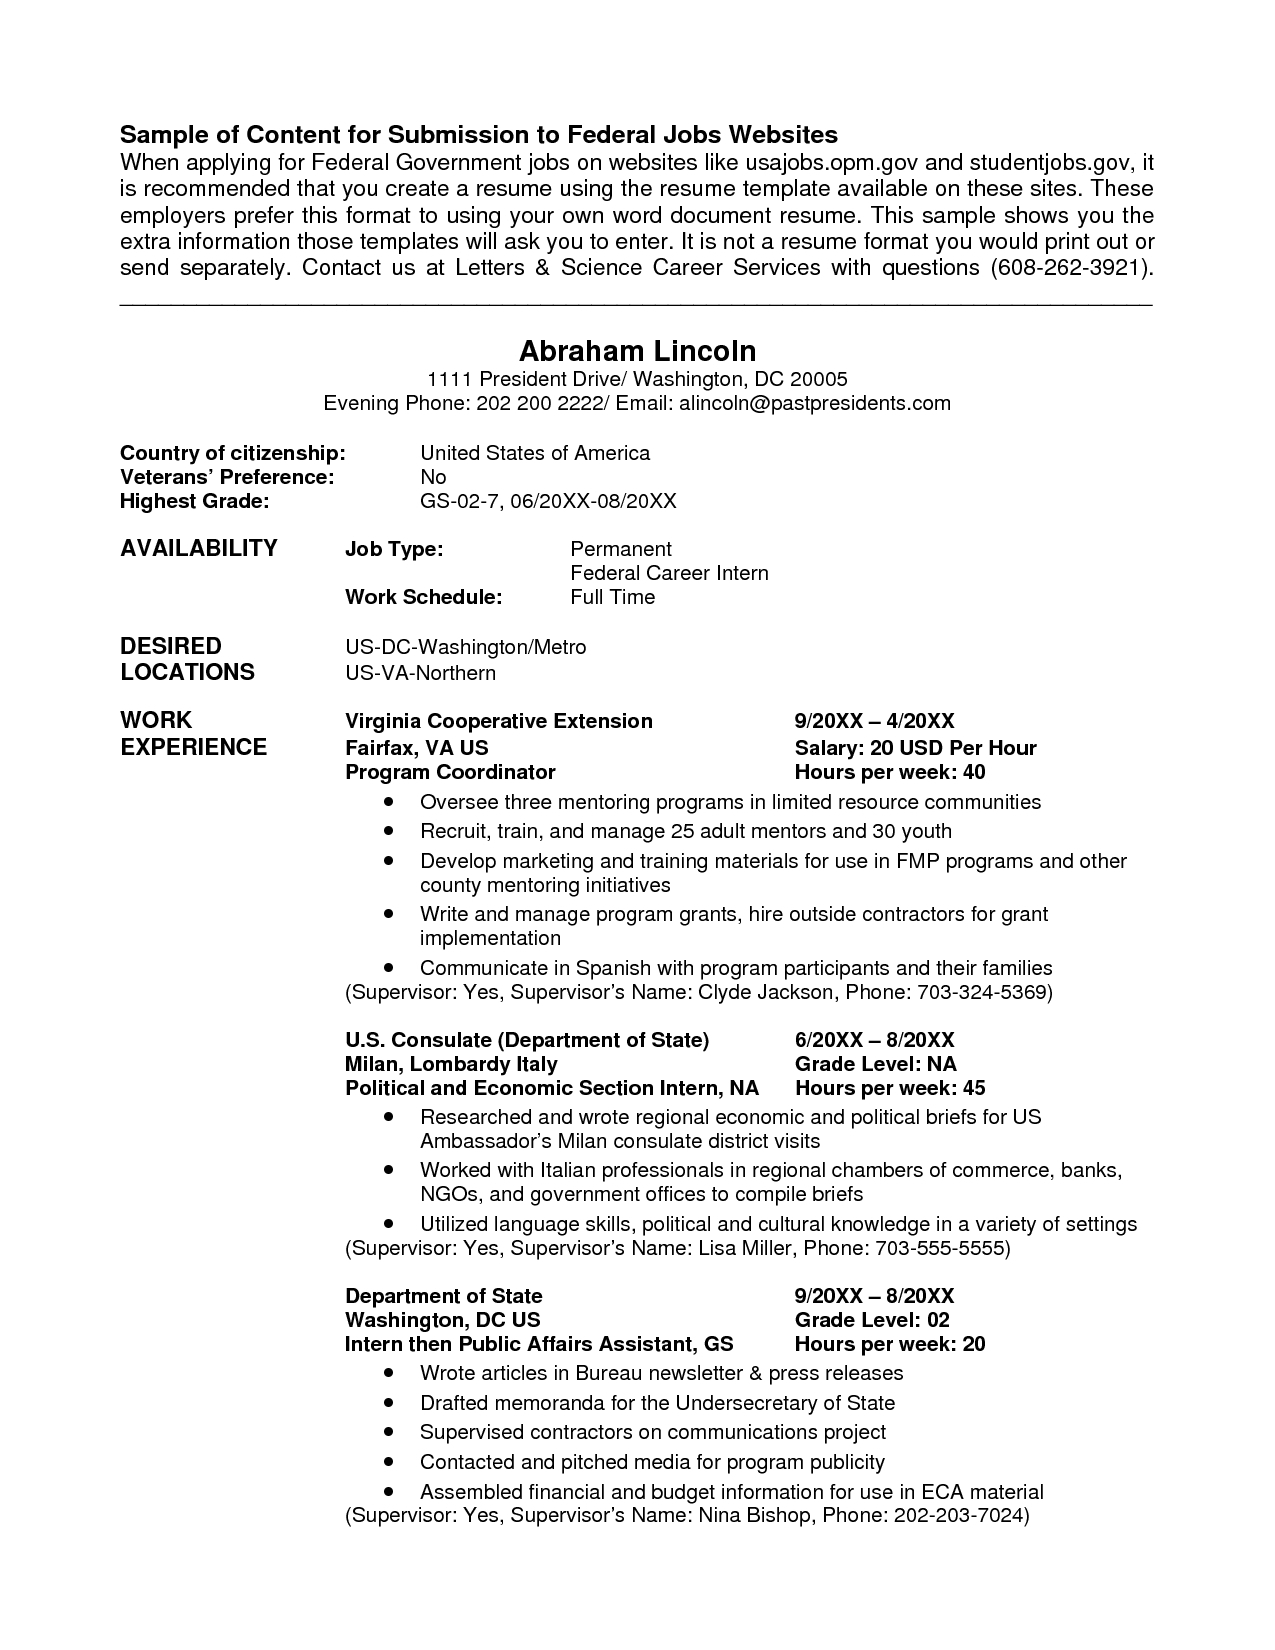 federal-resume-guidebook-7th-edition-resume-place